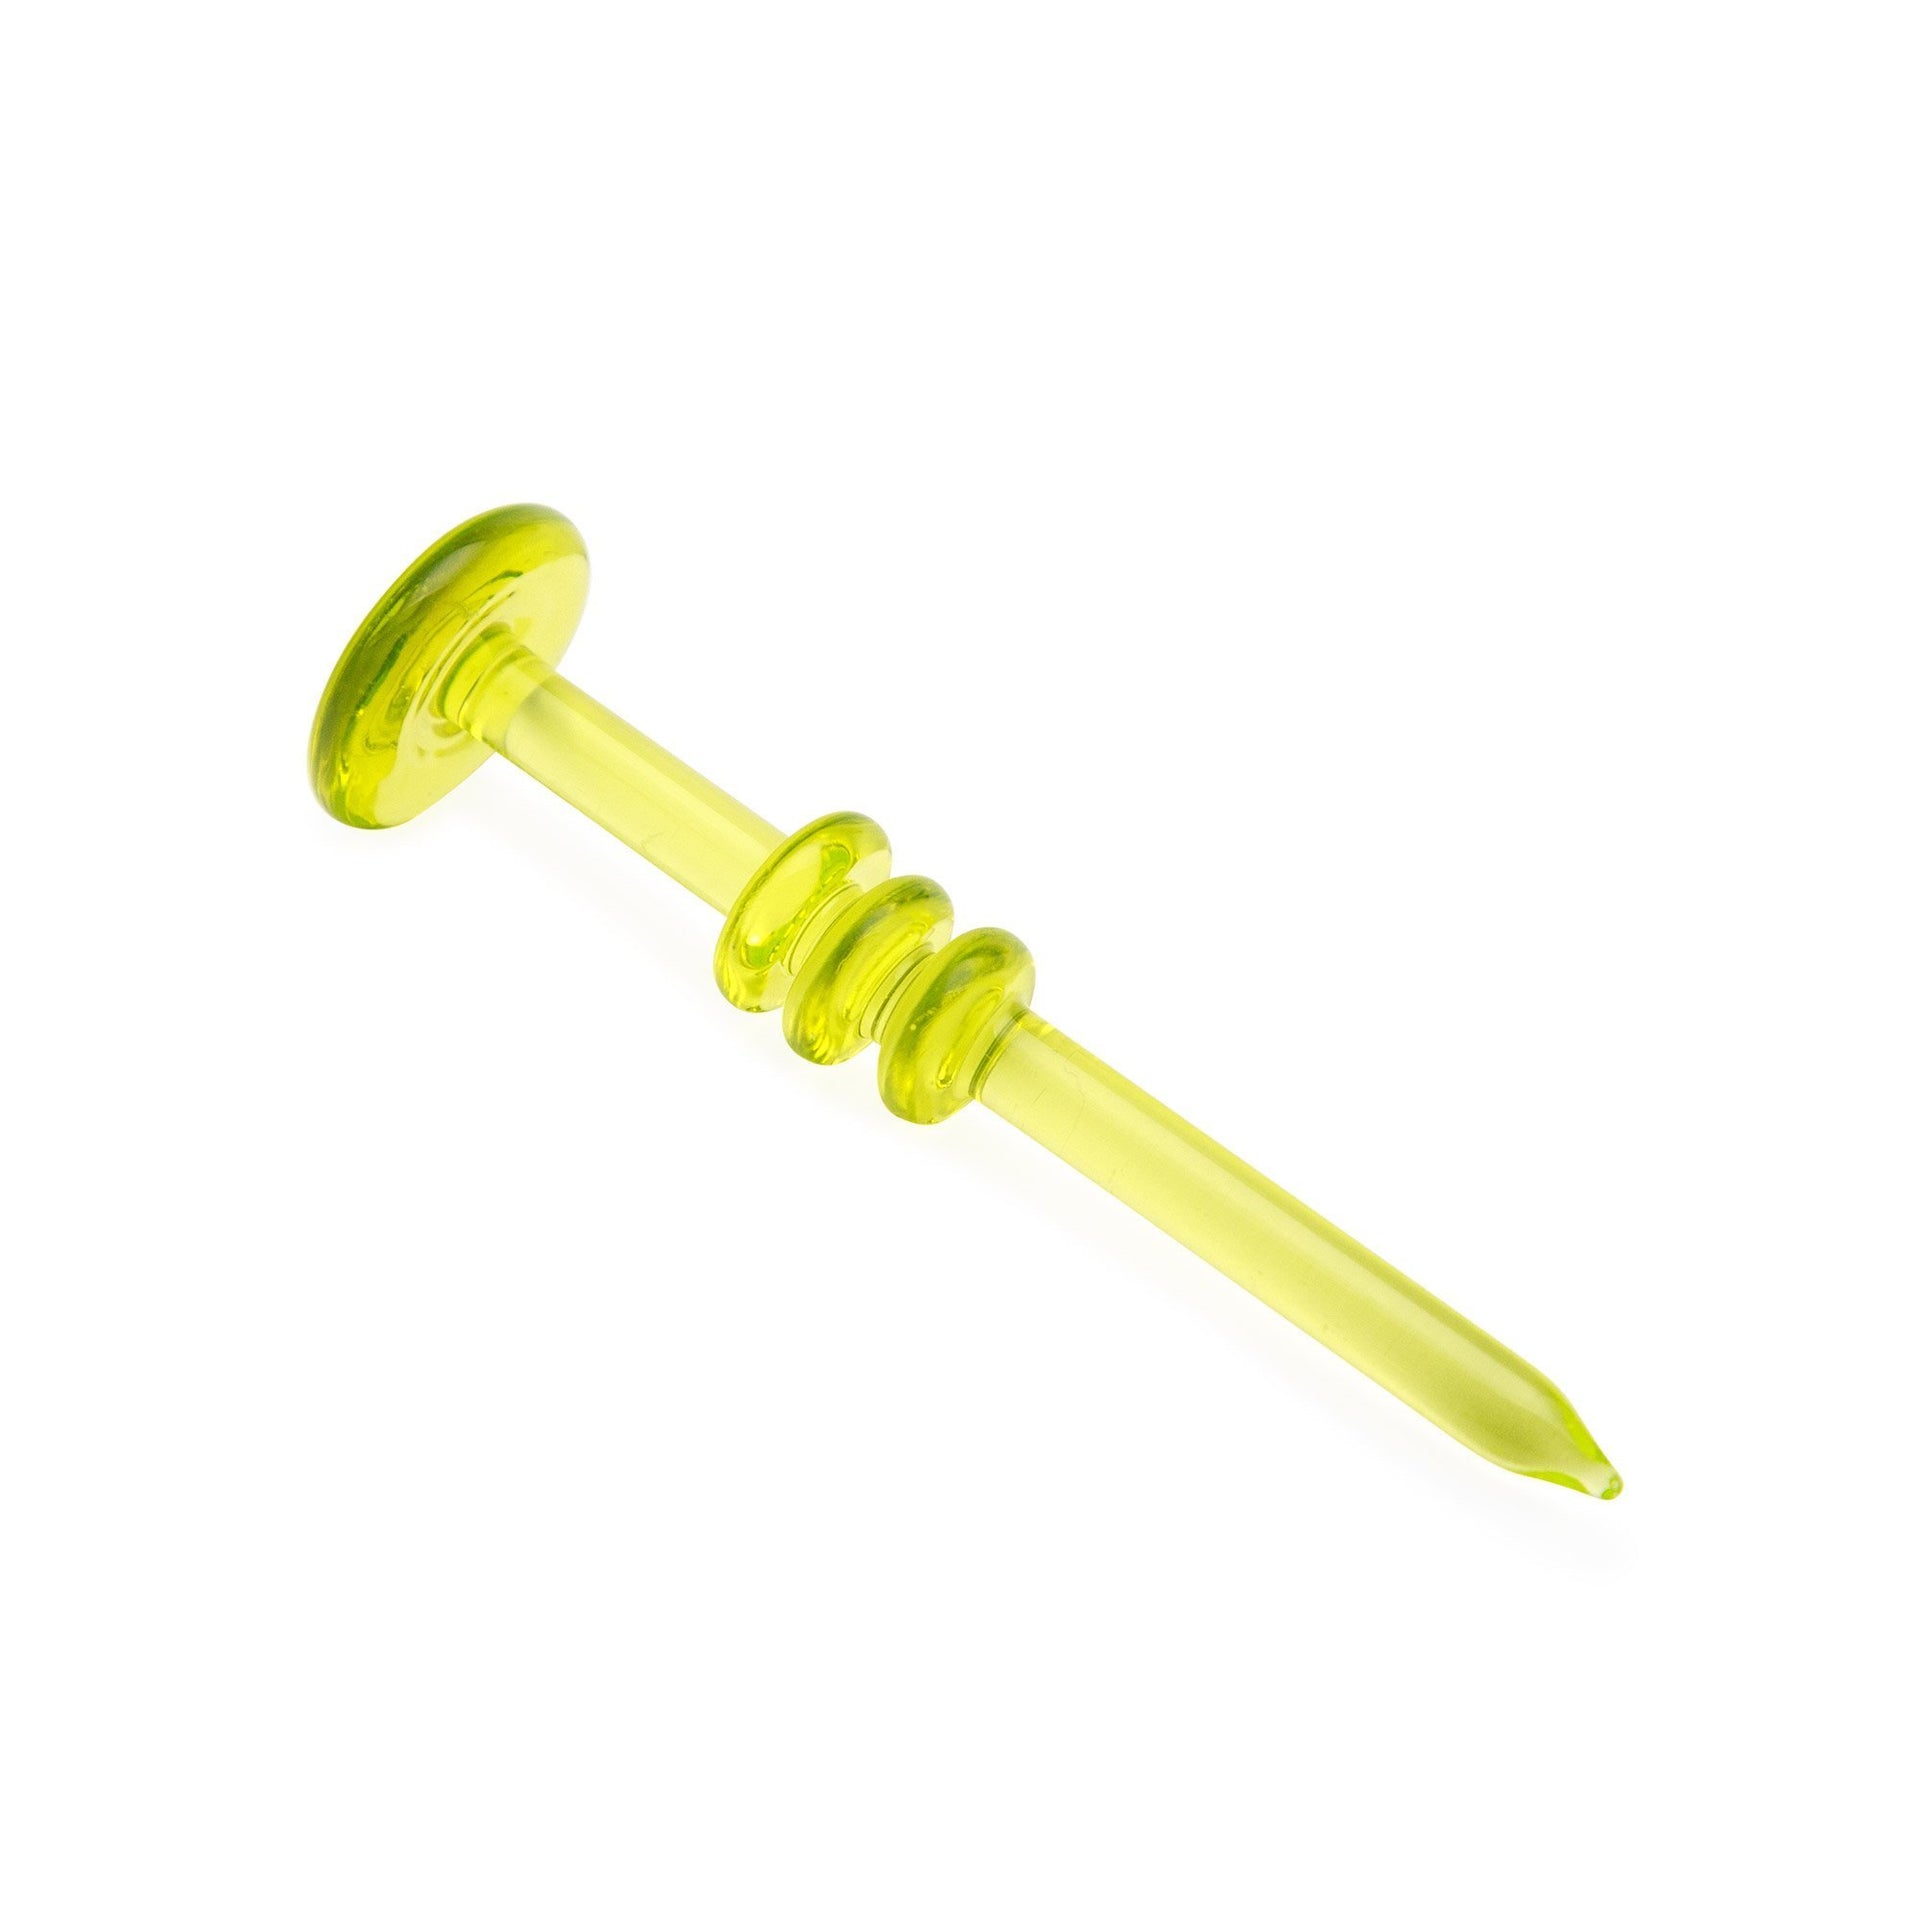 121mm Wax Dabbers Dry Herb Dab Tool With Plastic Tube Metal Wax Tool Dab  Rig For E Nail Glass Bong Silicone Smoking Pipe From Worldleaders, $0.81